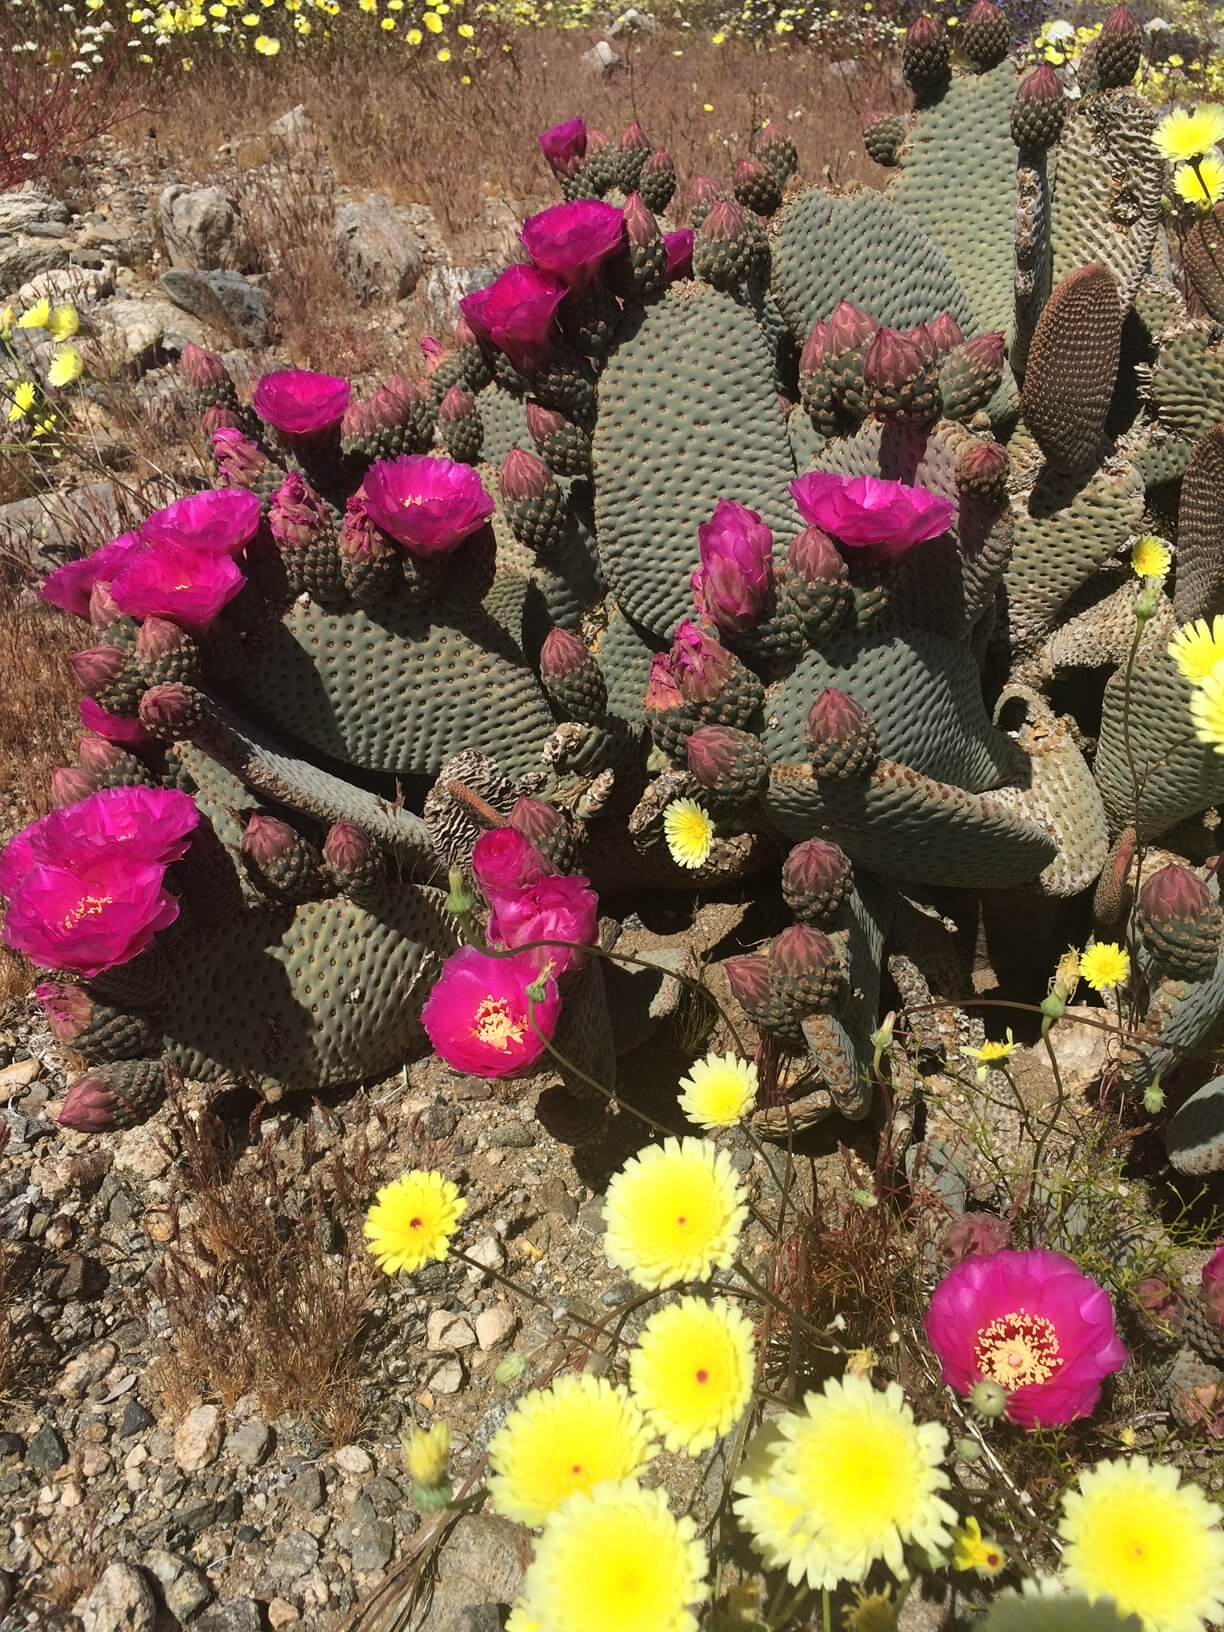 bright pink and yellow flowers bloom atop green cacti